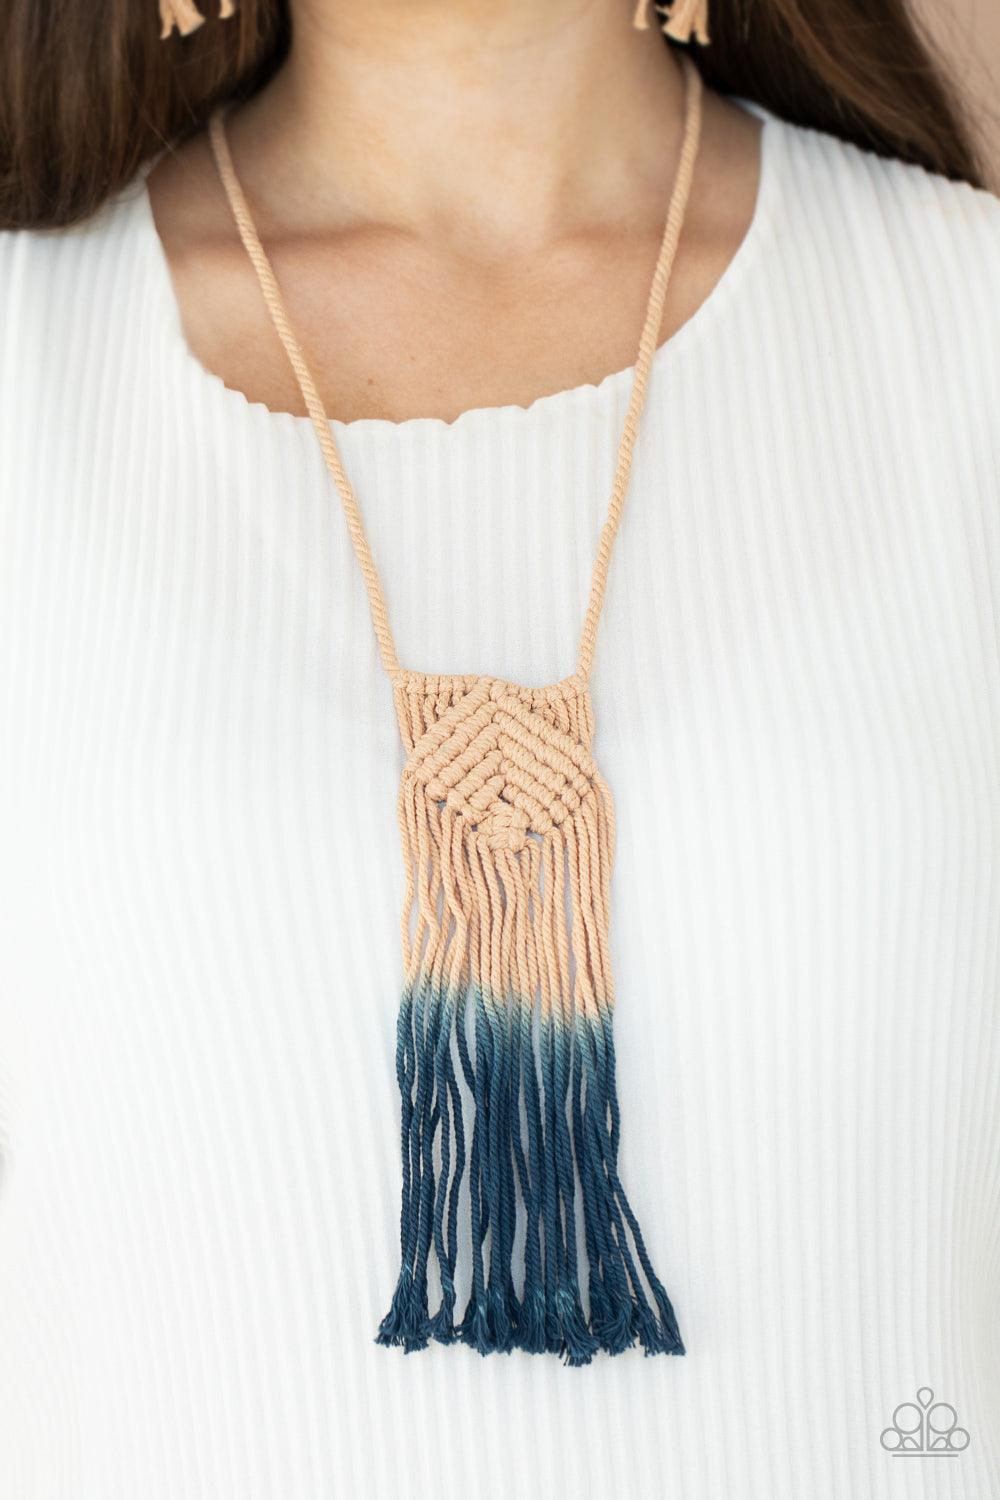 Paparazzi Accessories Look At MACRAME Now - Blue Fading from tan to Blue Depths, colorful twine-like cording delicately knots and weaves into a tasseled macramé inspired pendant across the chest. Features an adjustable sliding knot closure. Sold as one in